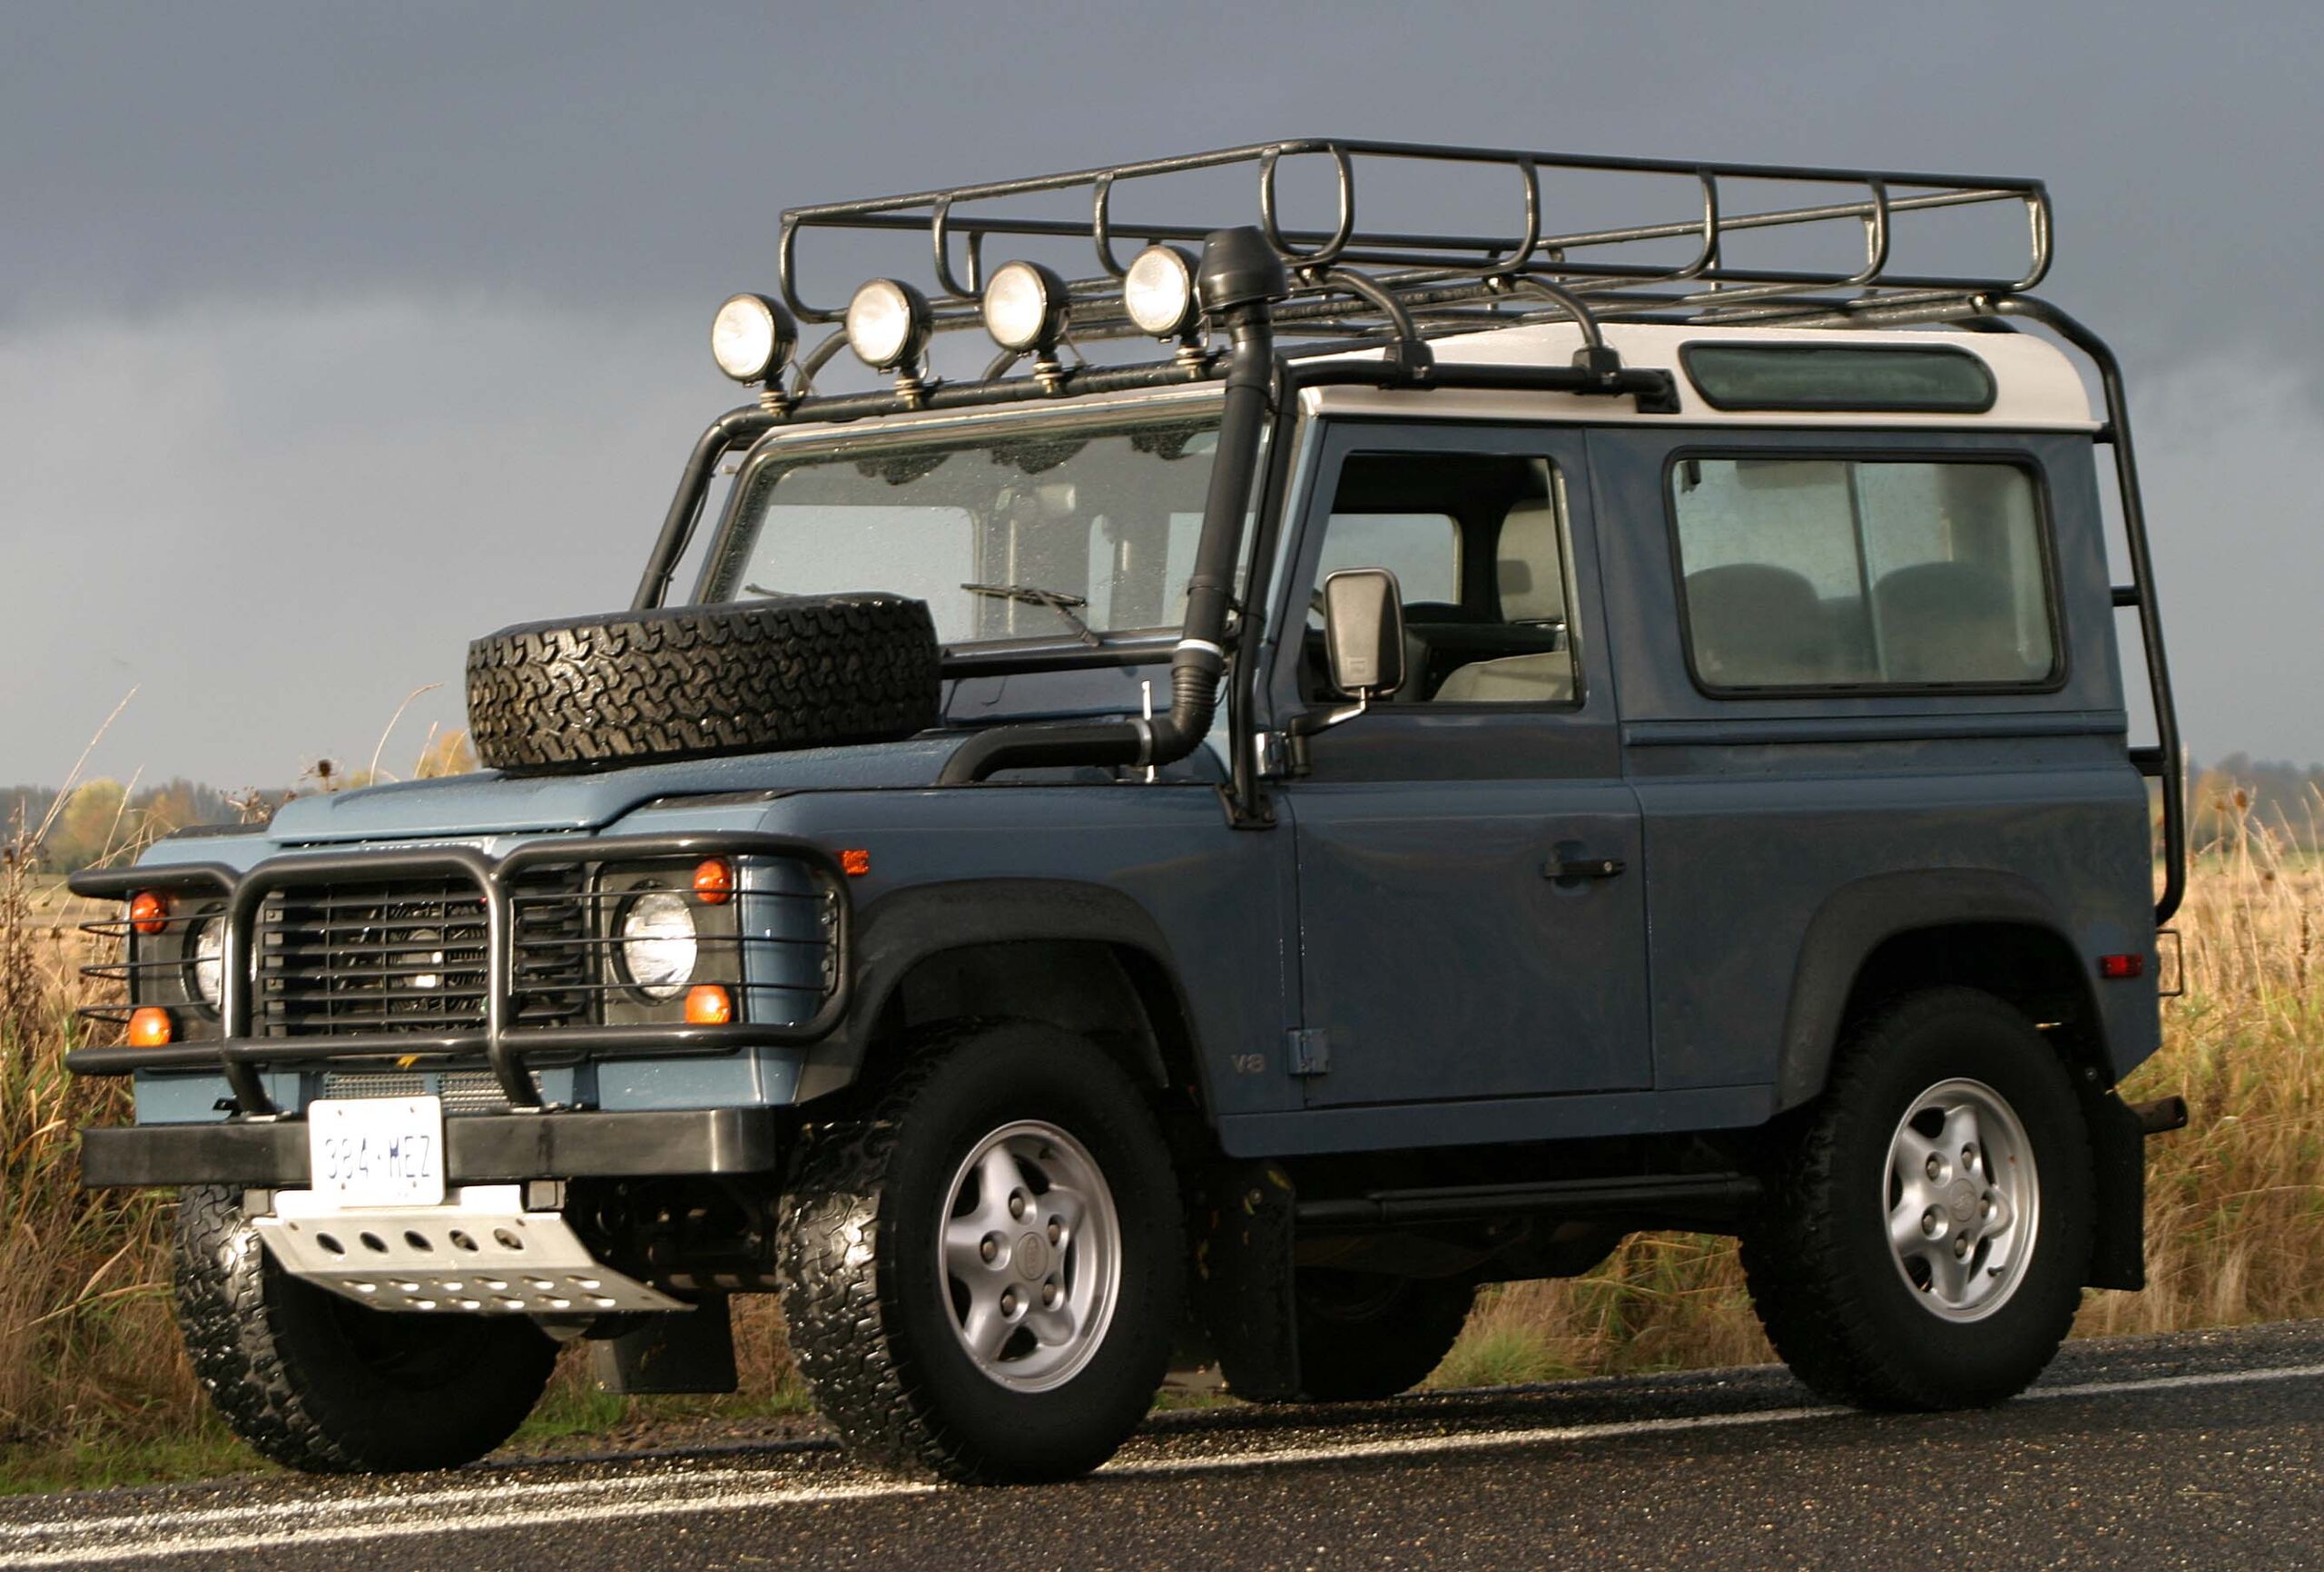 Thursday CarTune: Tom Petty and the Land Rover Defender take a trip to Pirate’s Cove